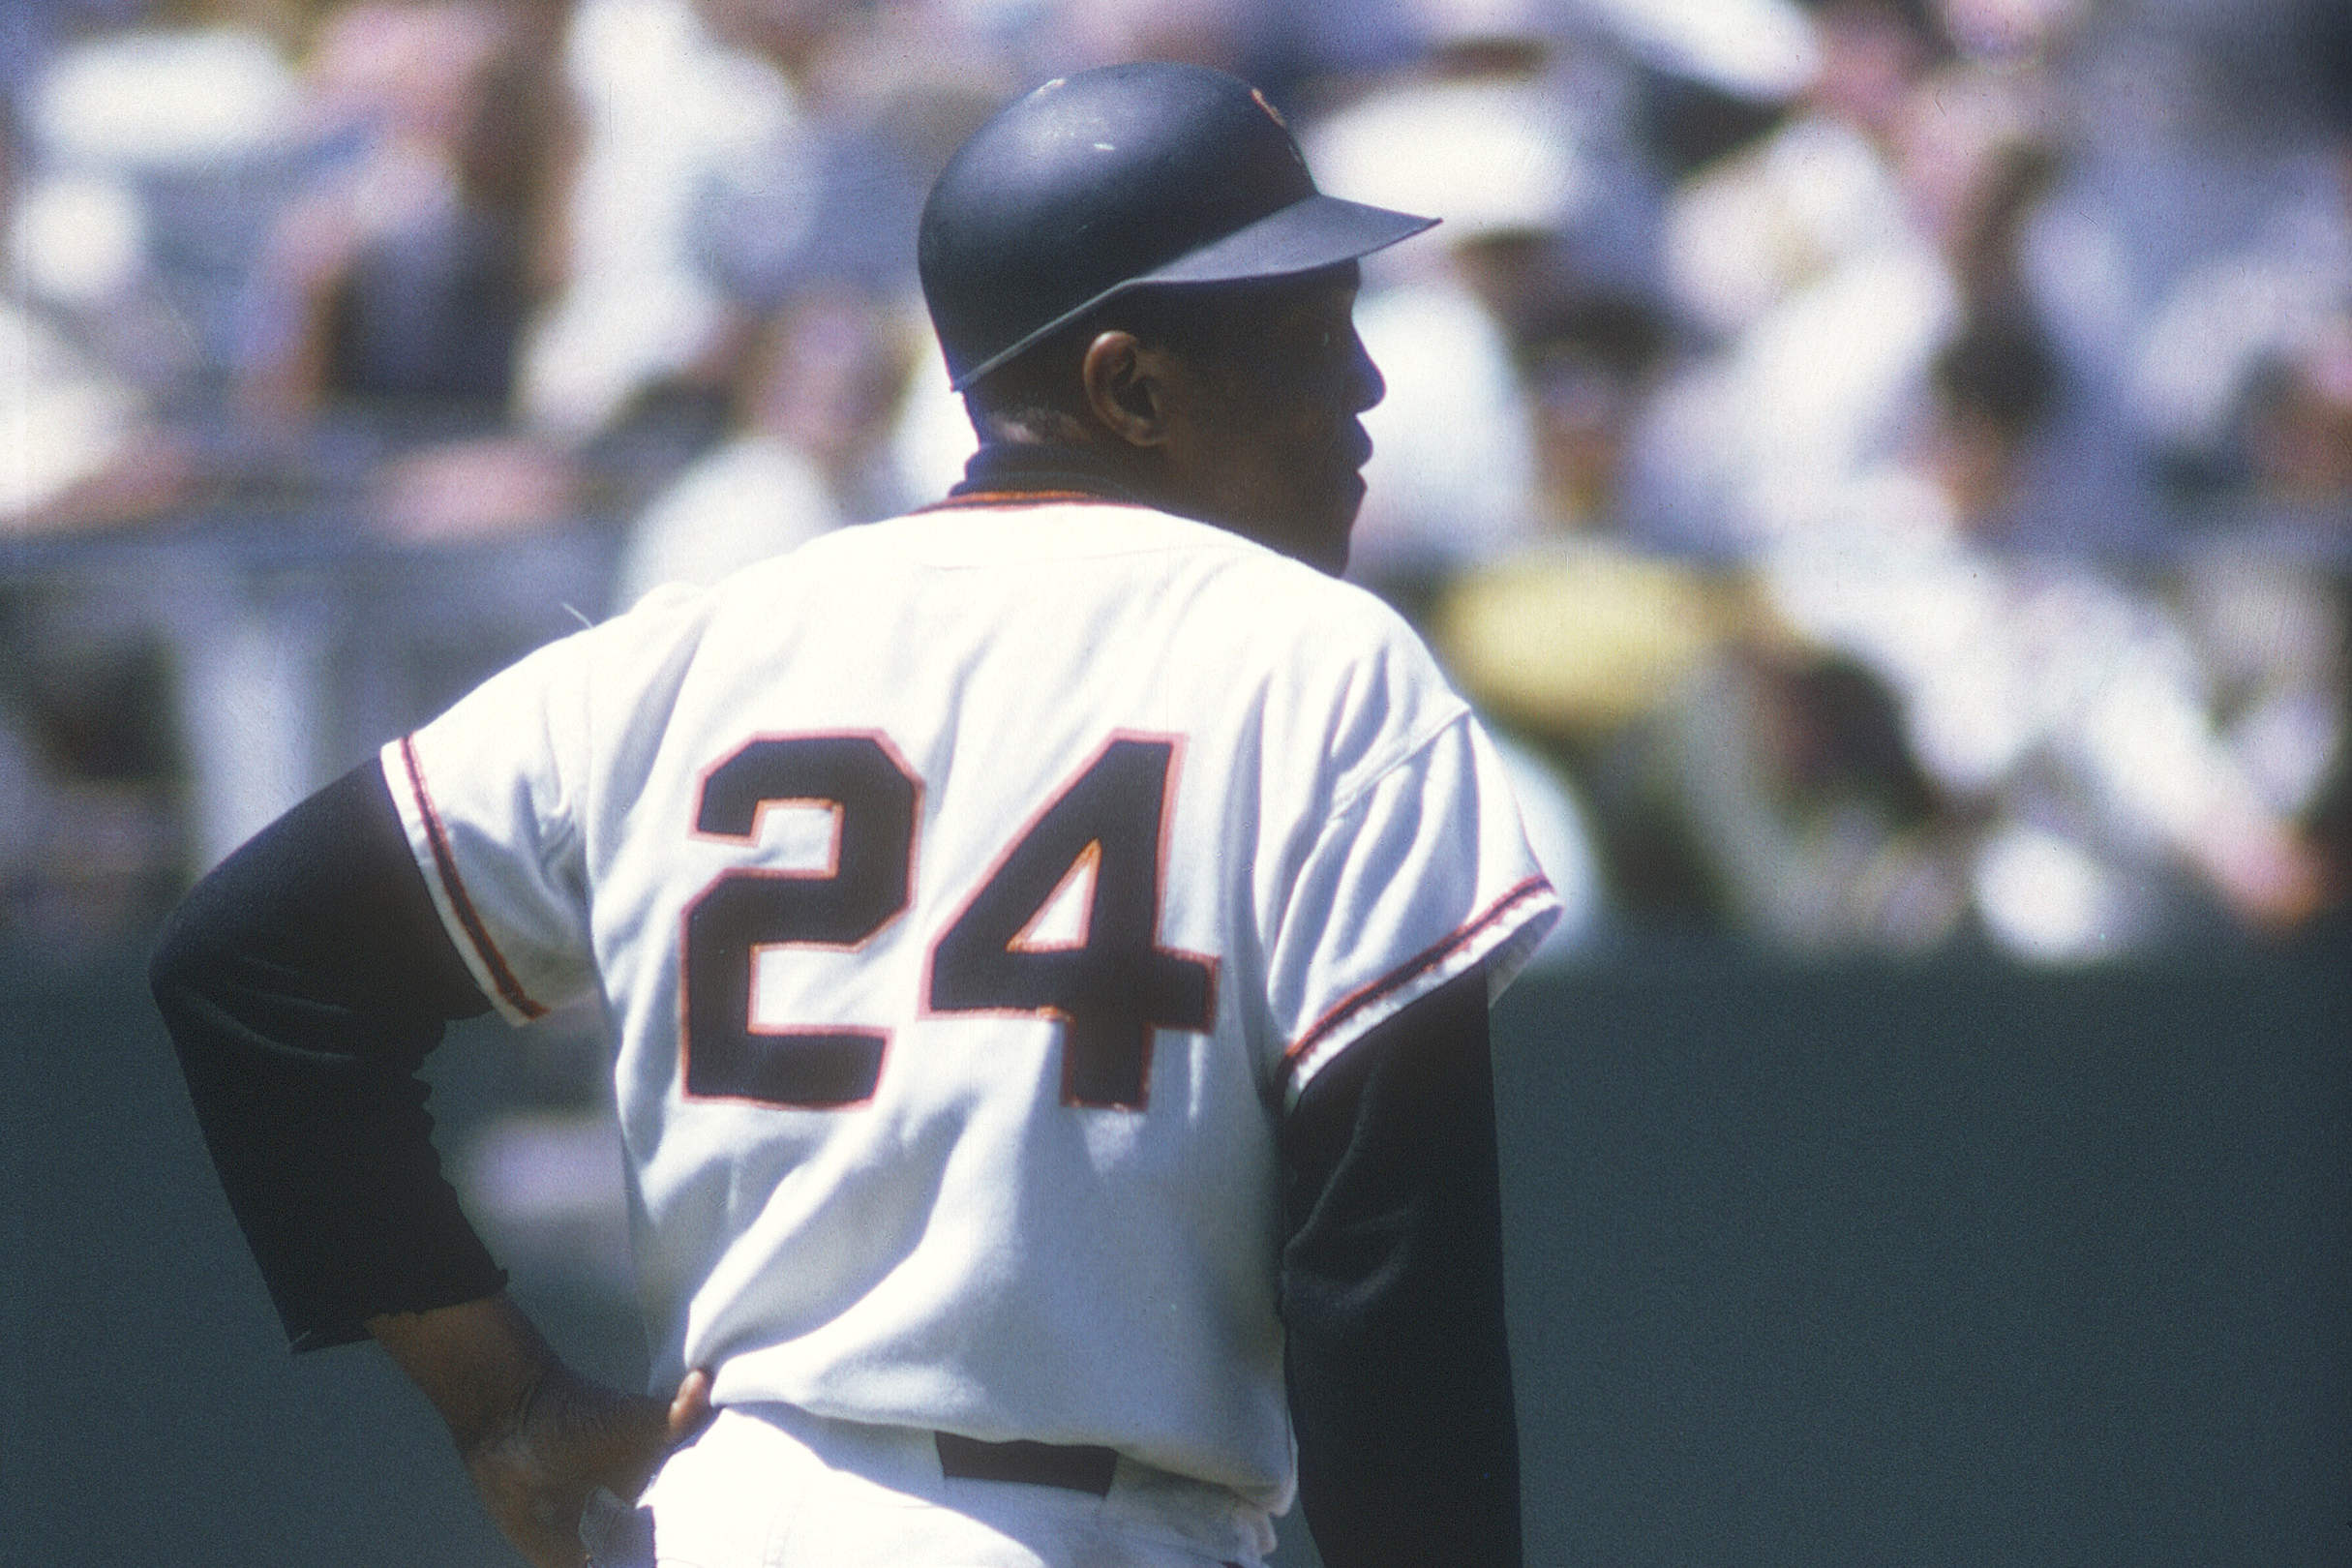 A baseball player in a white and red uniform with the number 24 is standing on a field, viewed from the back.